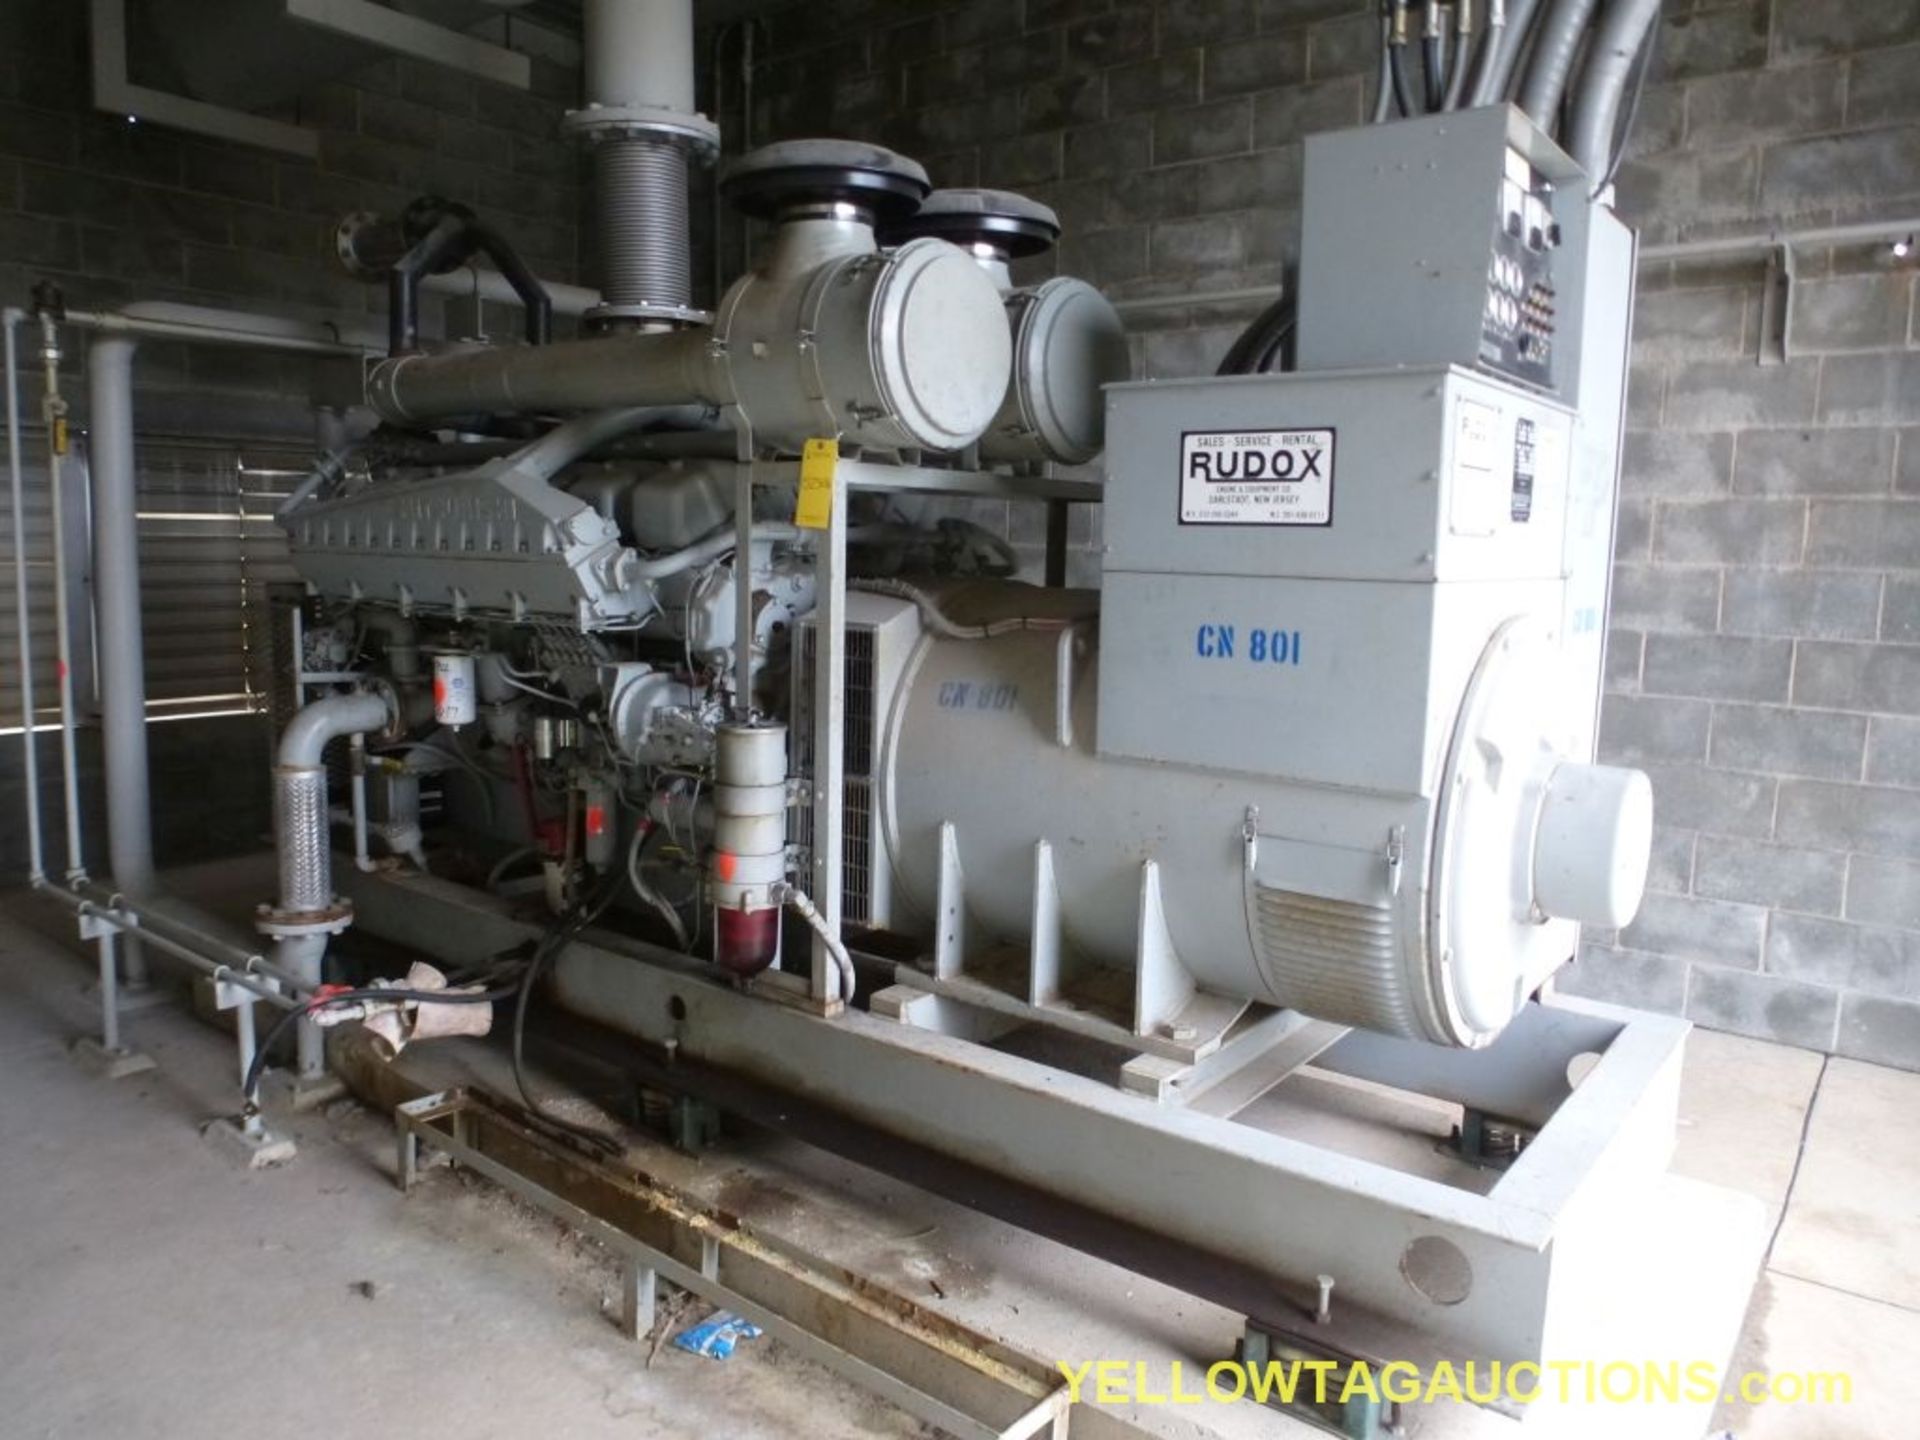 Rudox Diesel Generator - Model No. RM 750; 750 KW; 937 KVA; 277/480V; 1800 RPM; 679 Hours; Includes: